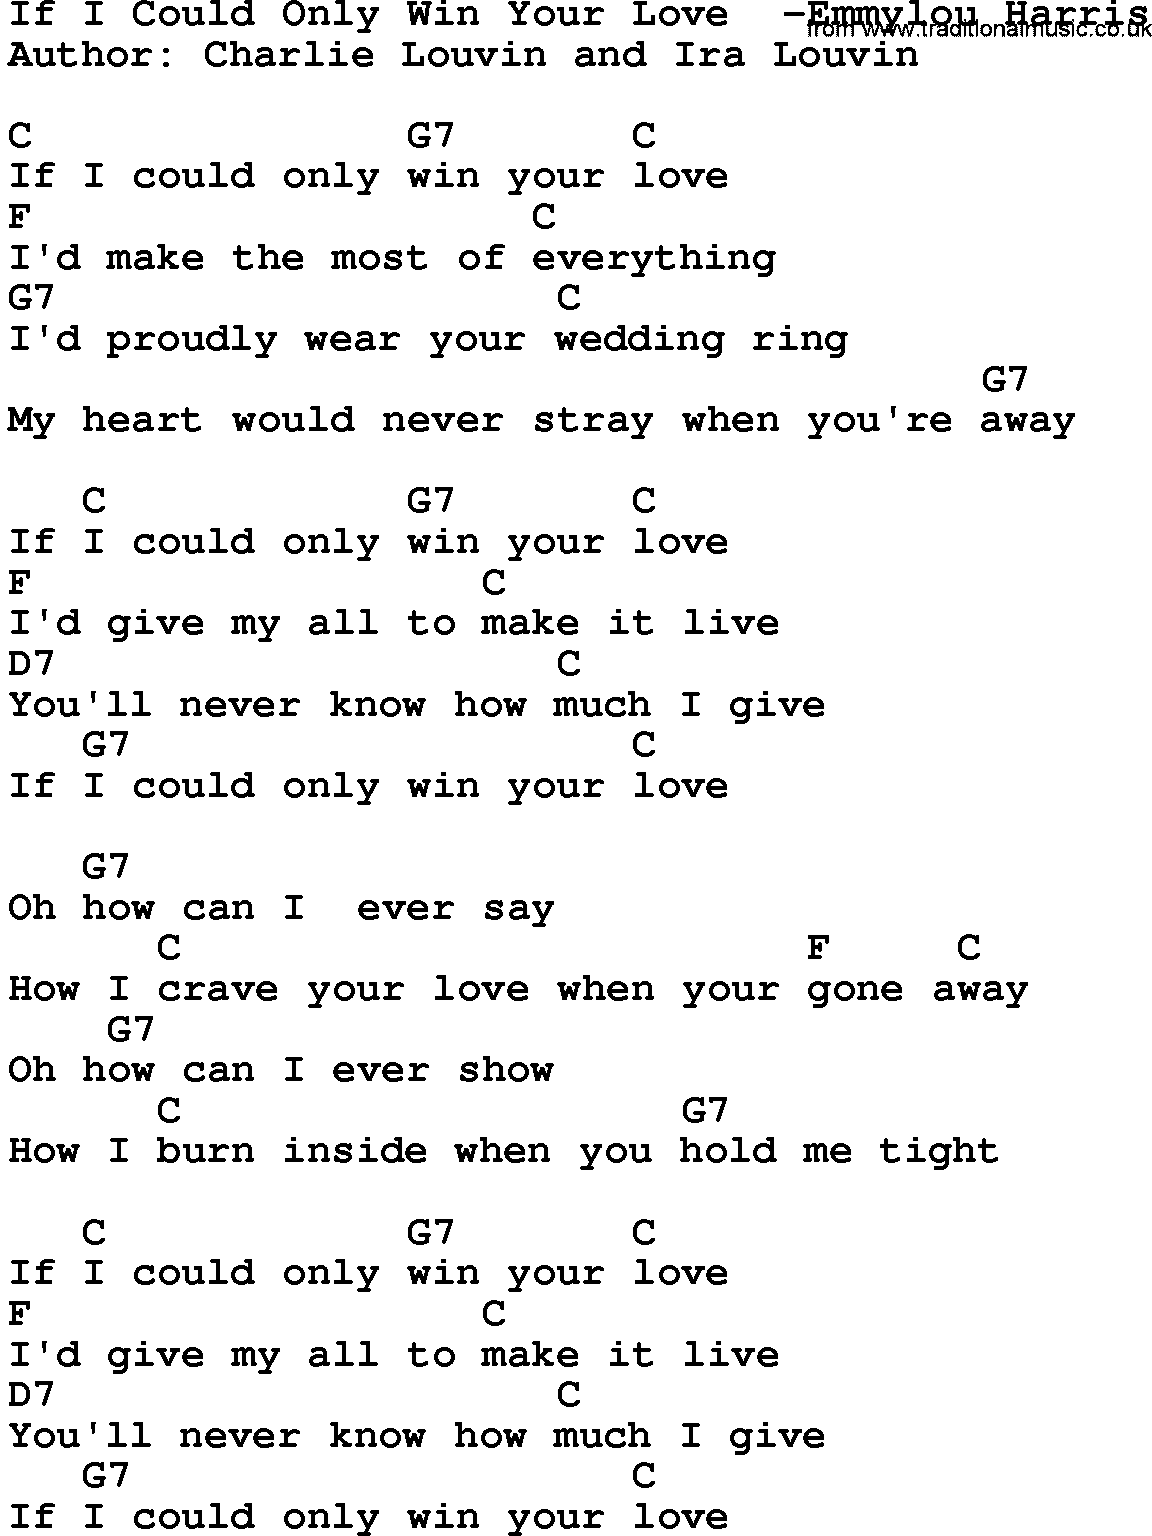 Country music song: If I Could Only Win Your Love -Emmylou Harris lyrics and chords